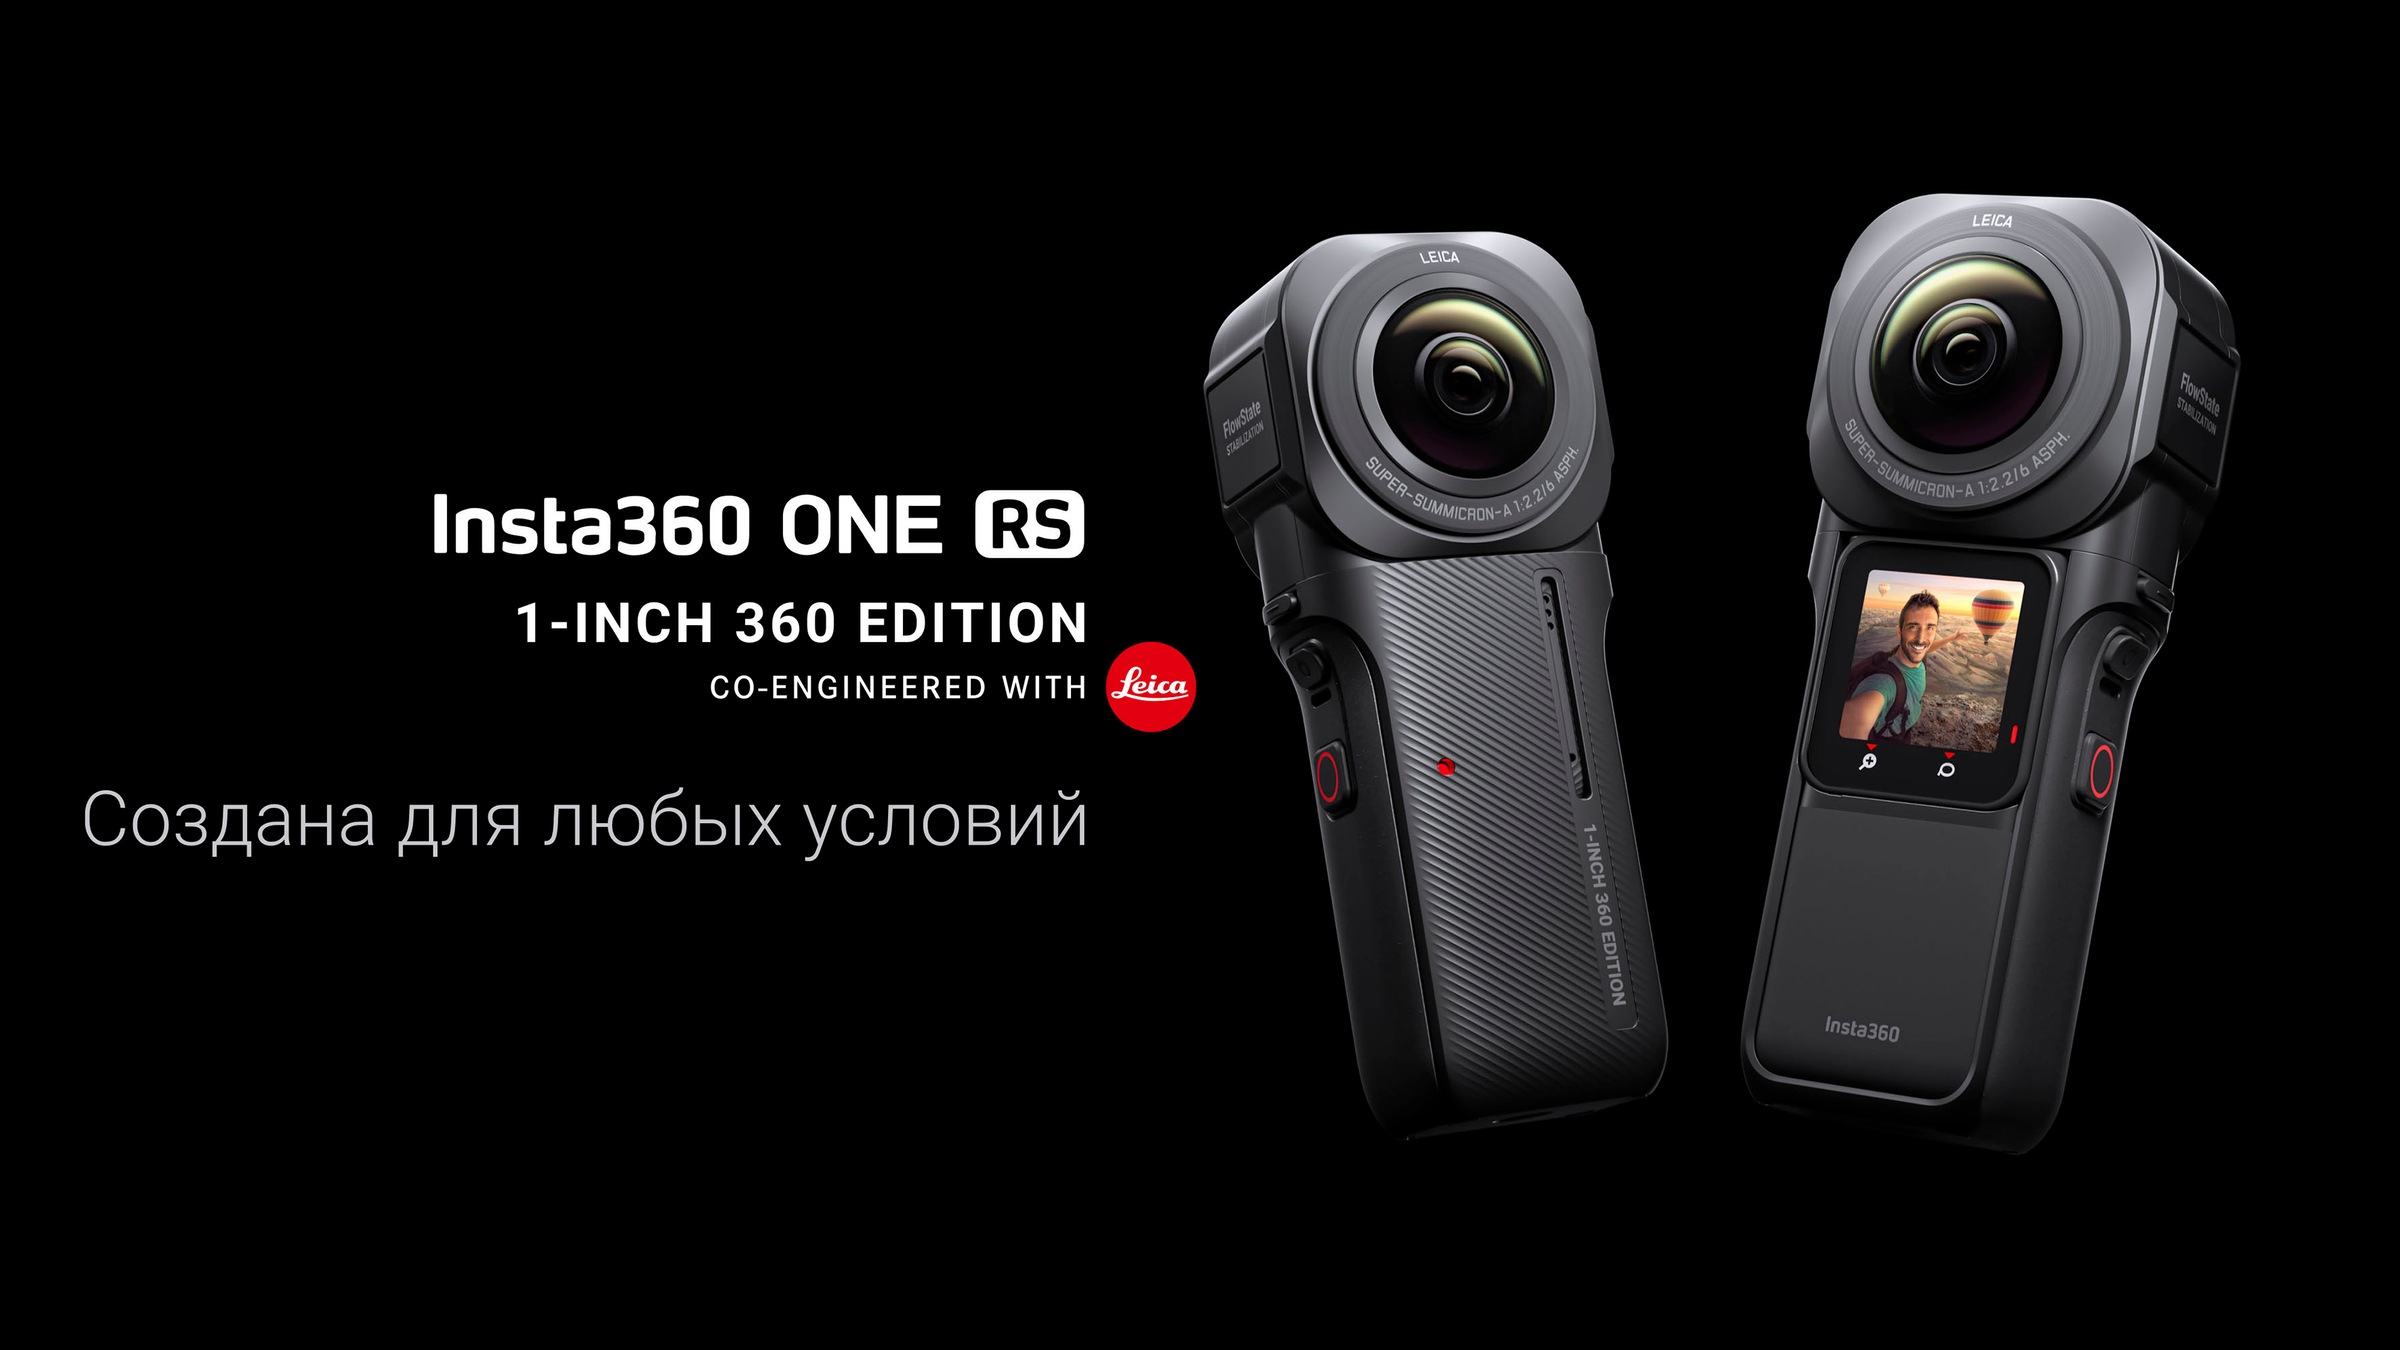 jetzt RS »ONE %Sale Insta360 Edition«, Action WLAN 6K, 360 im (Wi-Fi)-Bluetooth Cam 1-Inch